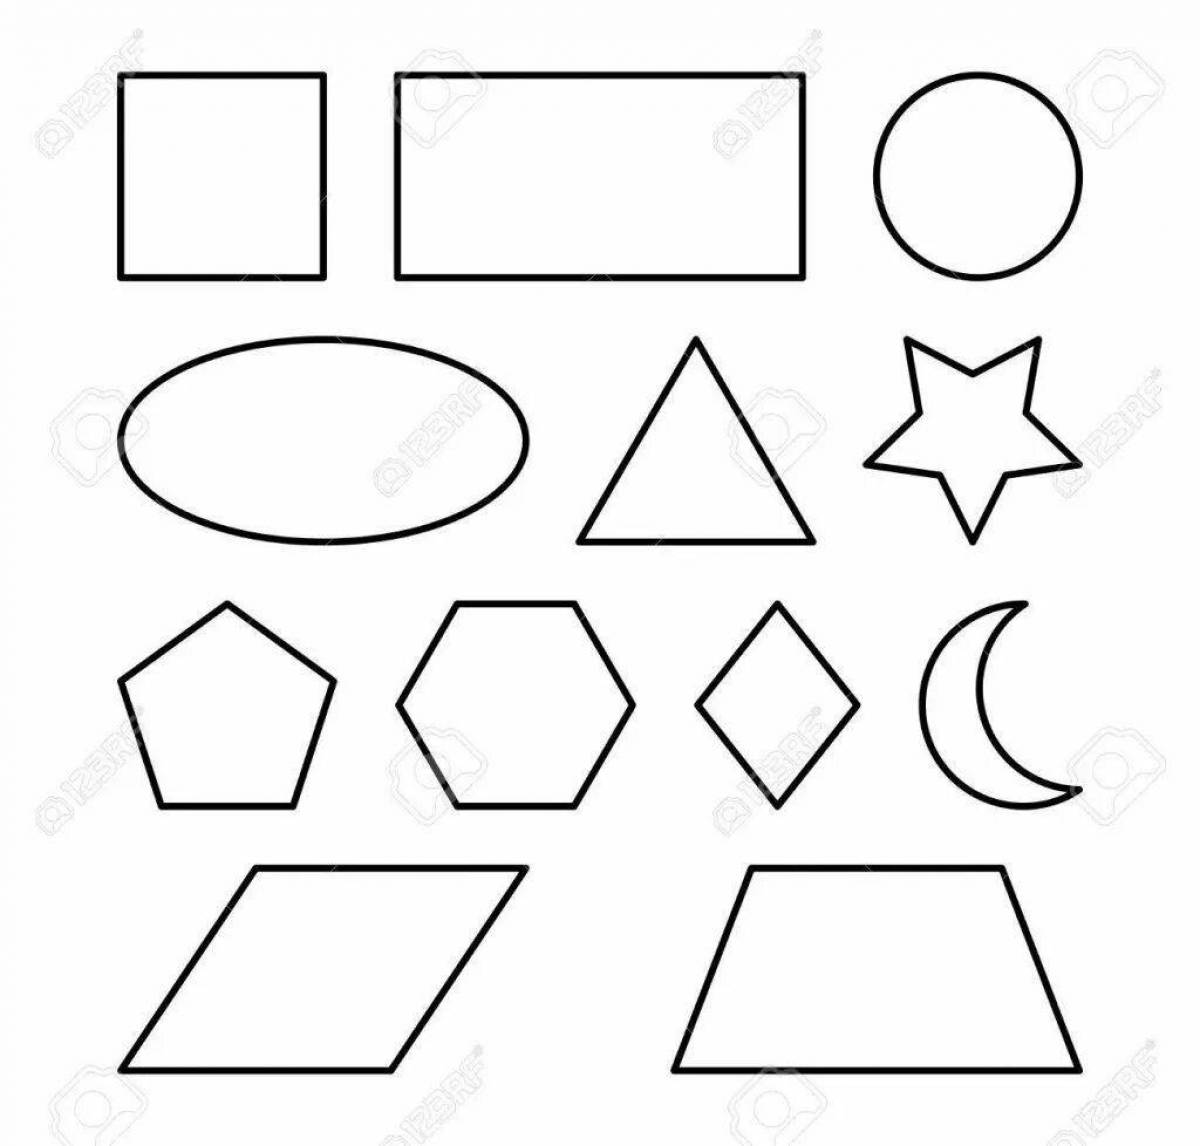 Coloring page cheerful circle and square